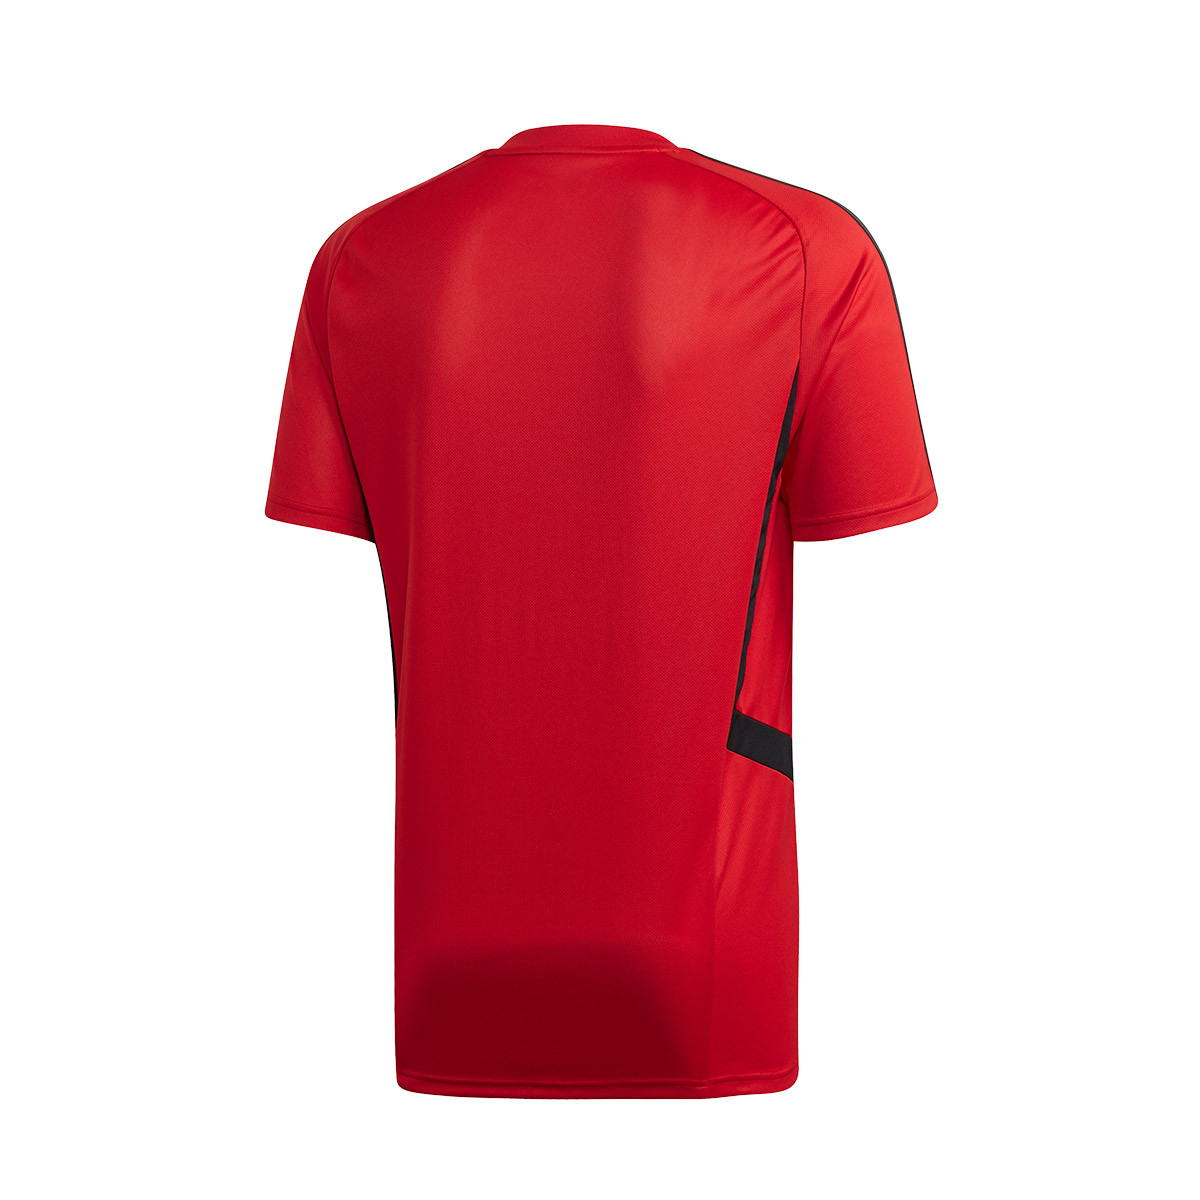 manchester united jersey red